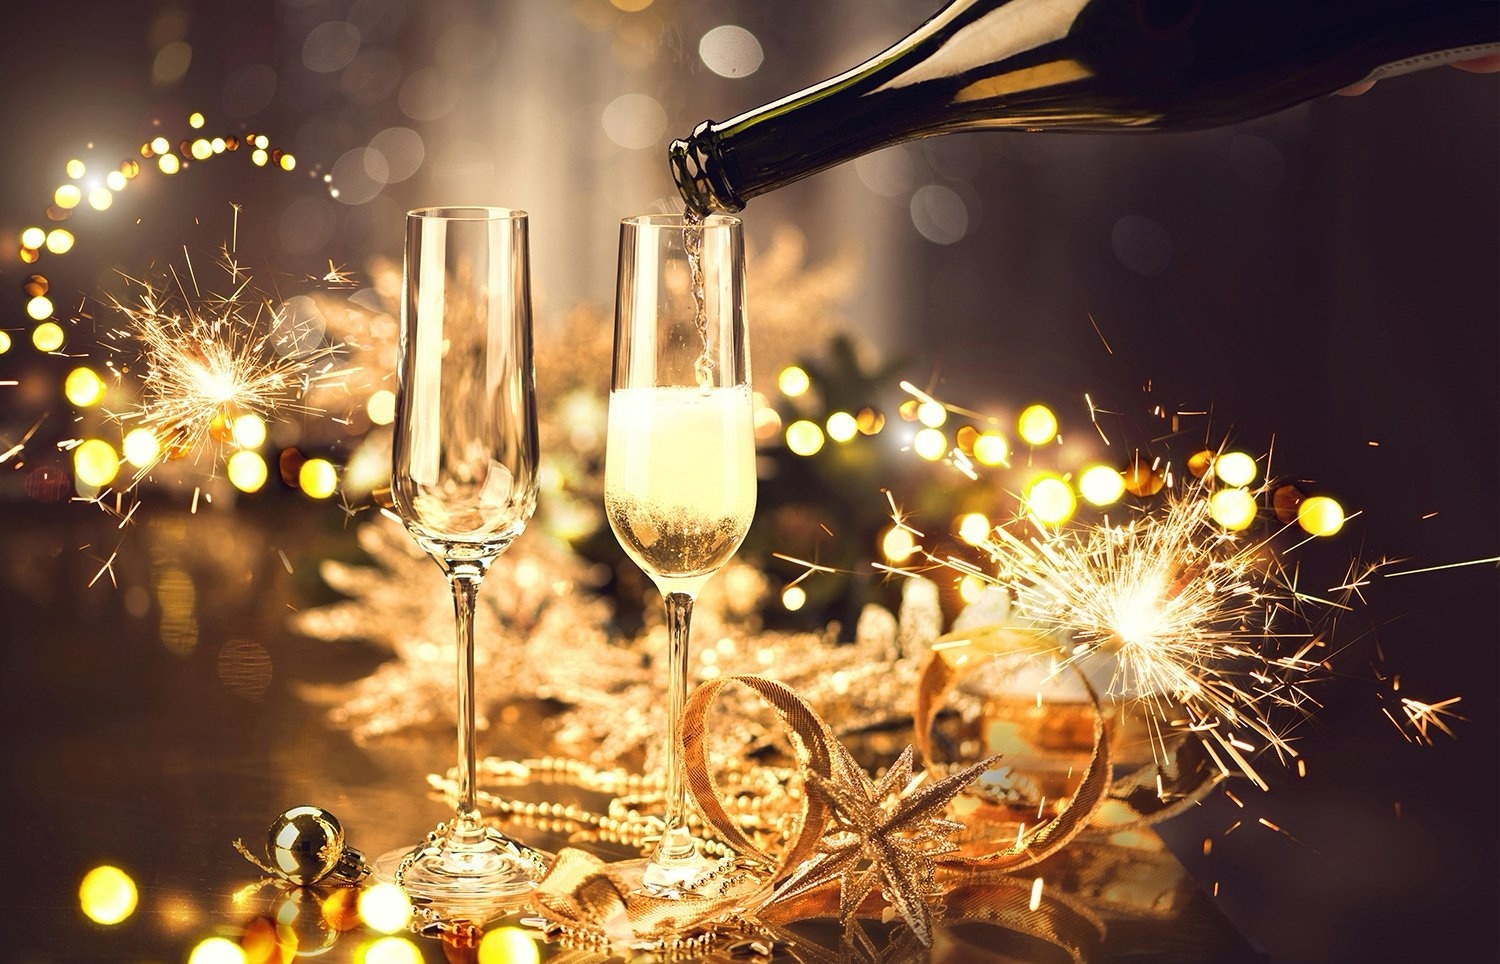 Welcoming New Year’s Eve at Lotte Hotel Saigon